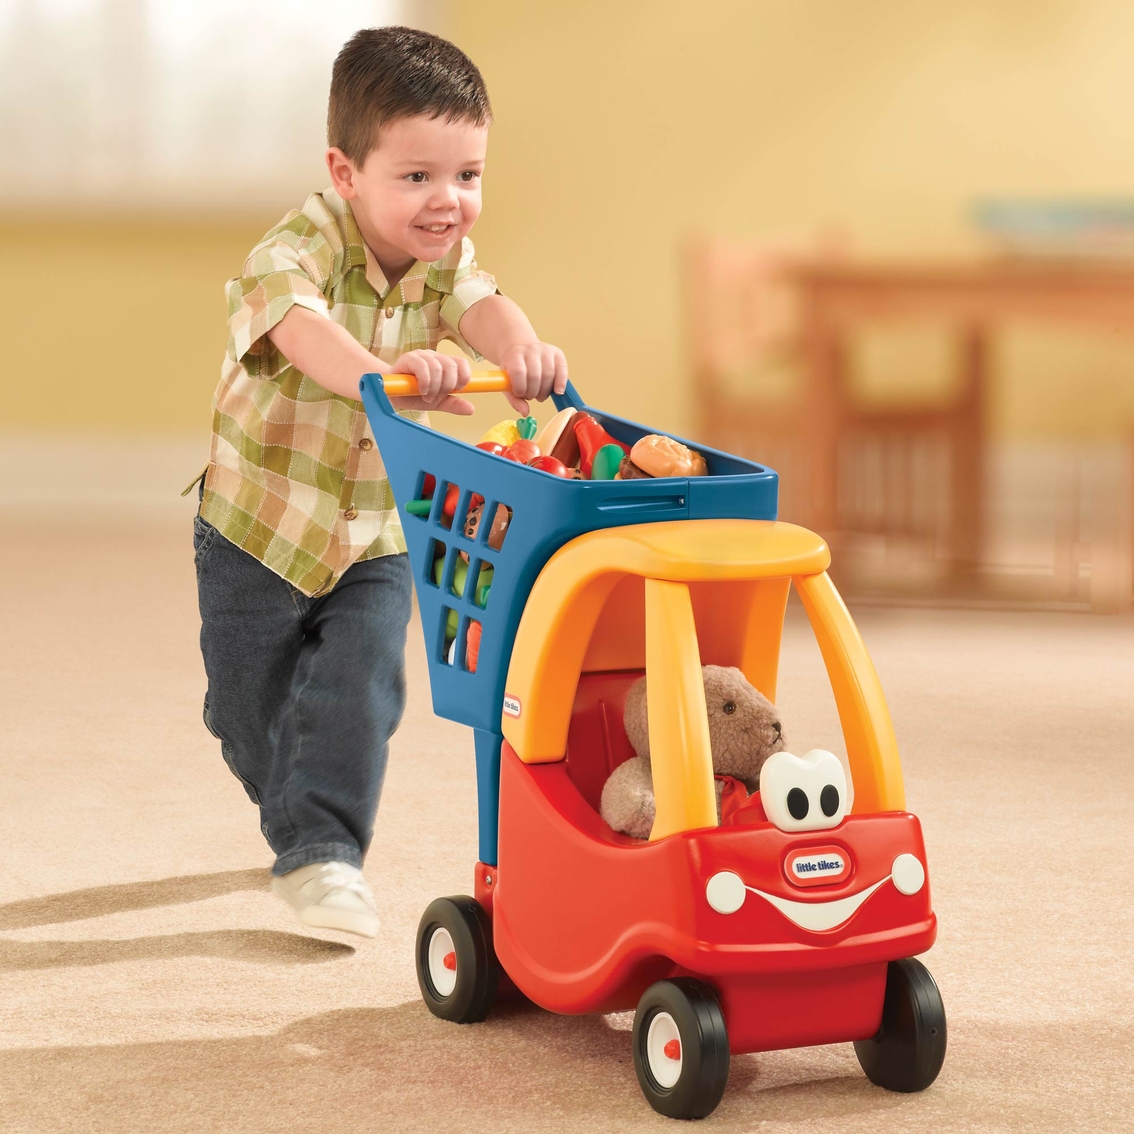 Little Tikes Cozy Coupe Shopping Cart - Image 2 of 2